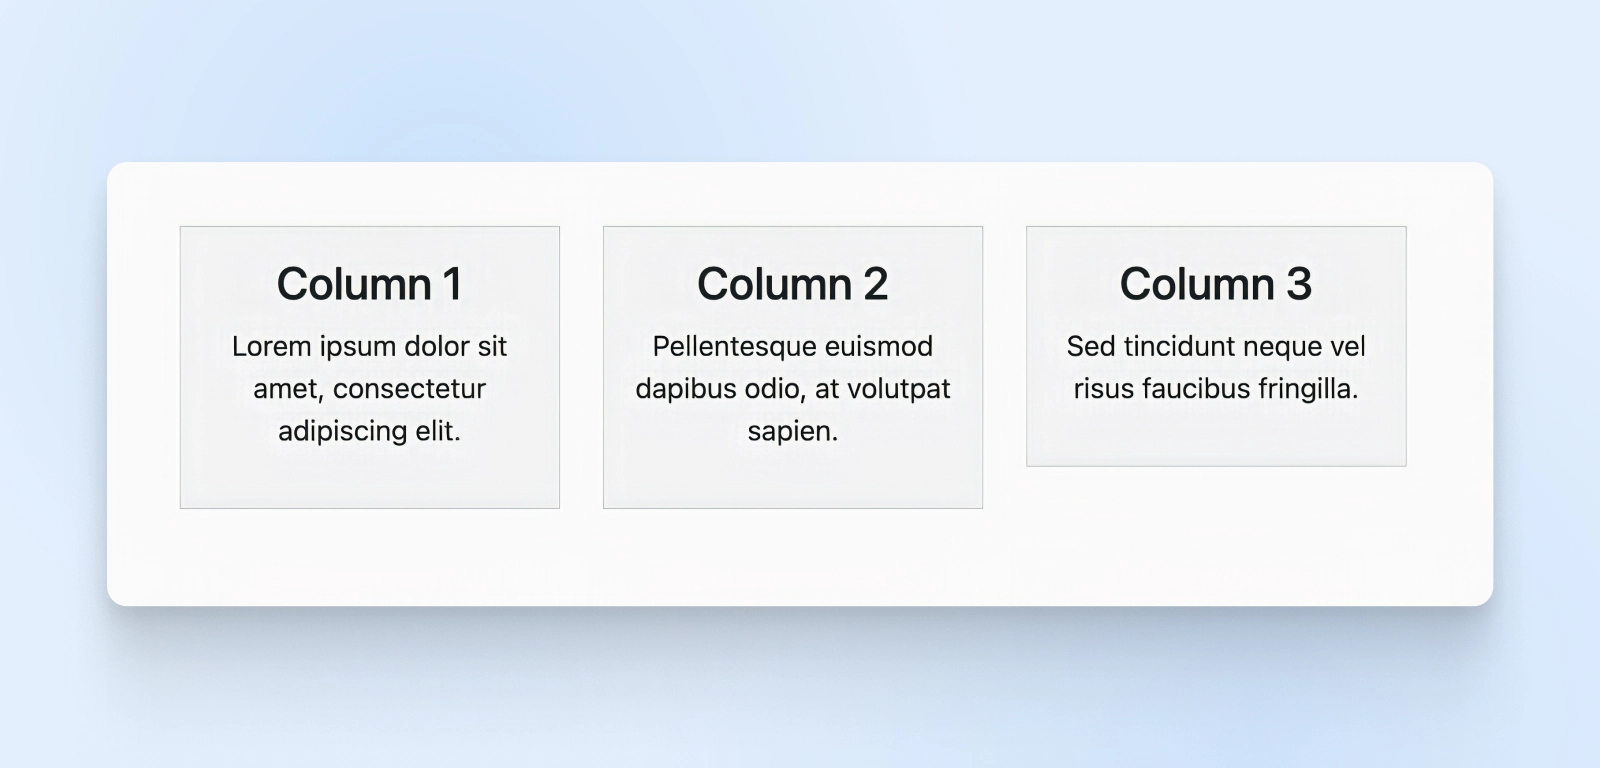 Three columns with Lorem ipsum text appear against a light blue background